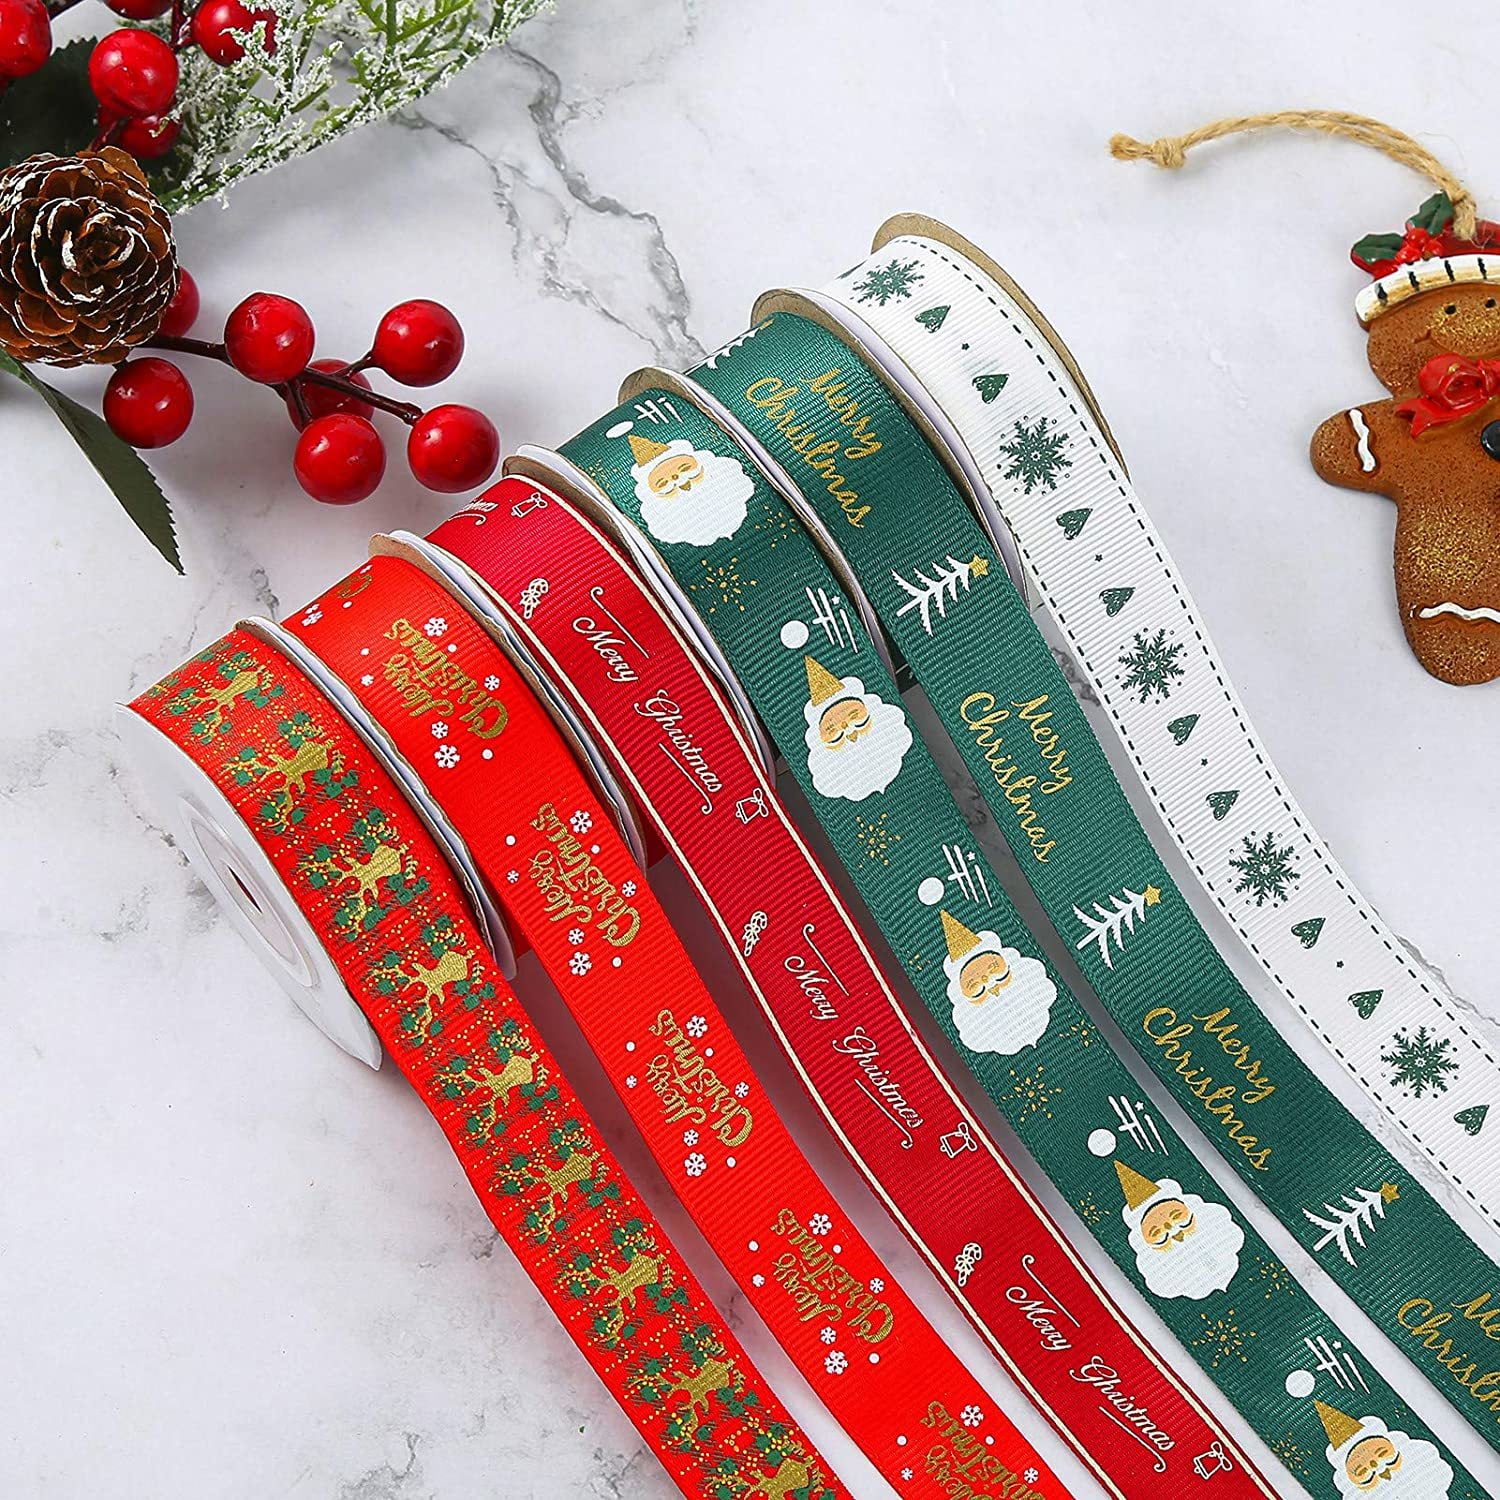 Christmas Red and Green Satin Ribbons Berisfords Trimmings 3 Metre Lengths  Crafting Sewing Card Making Gift Wrapping 